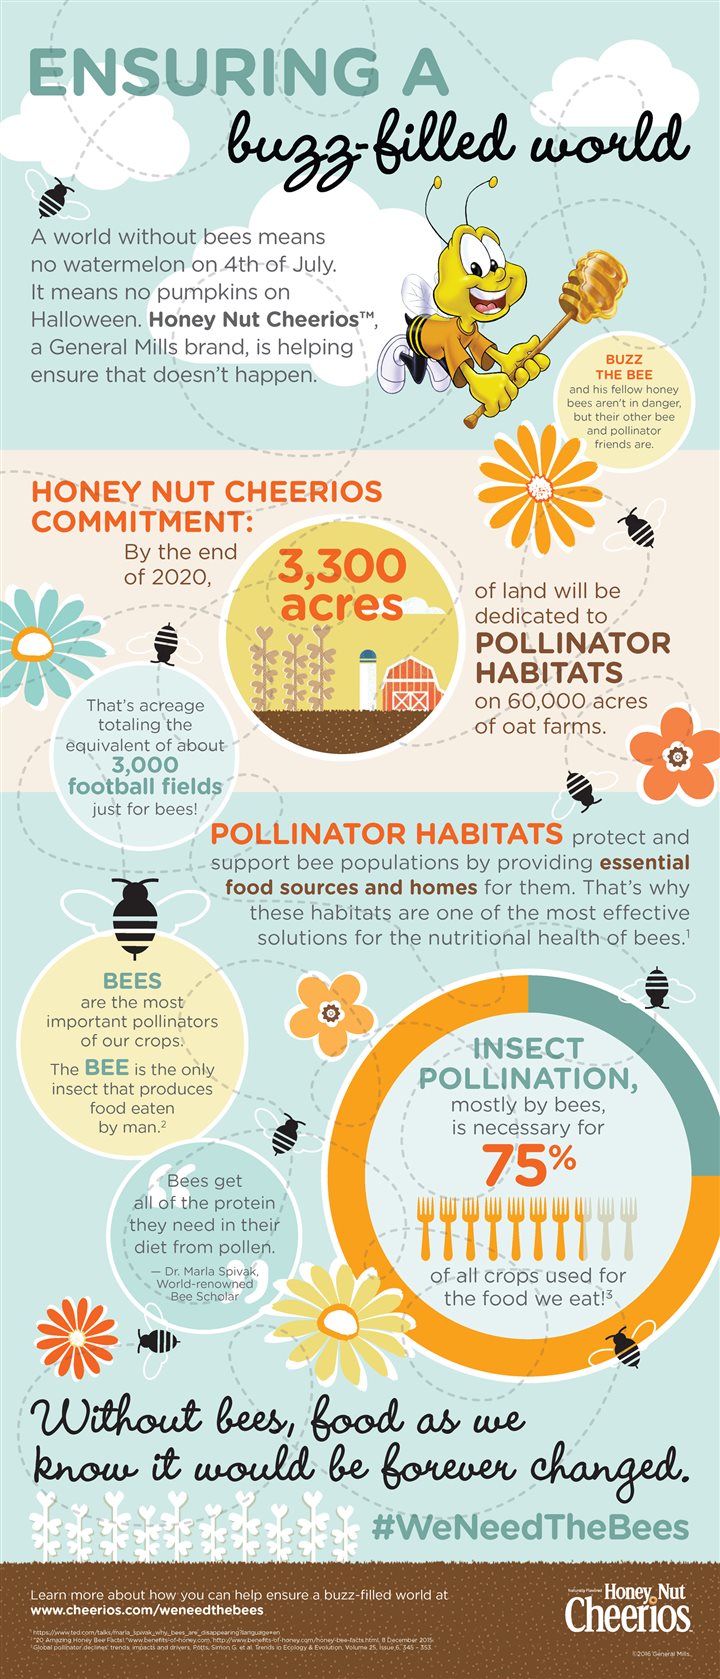 We need the bees (Infographic) – Baltimore Sun